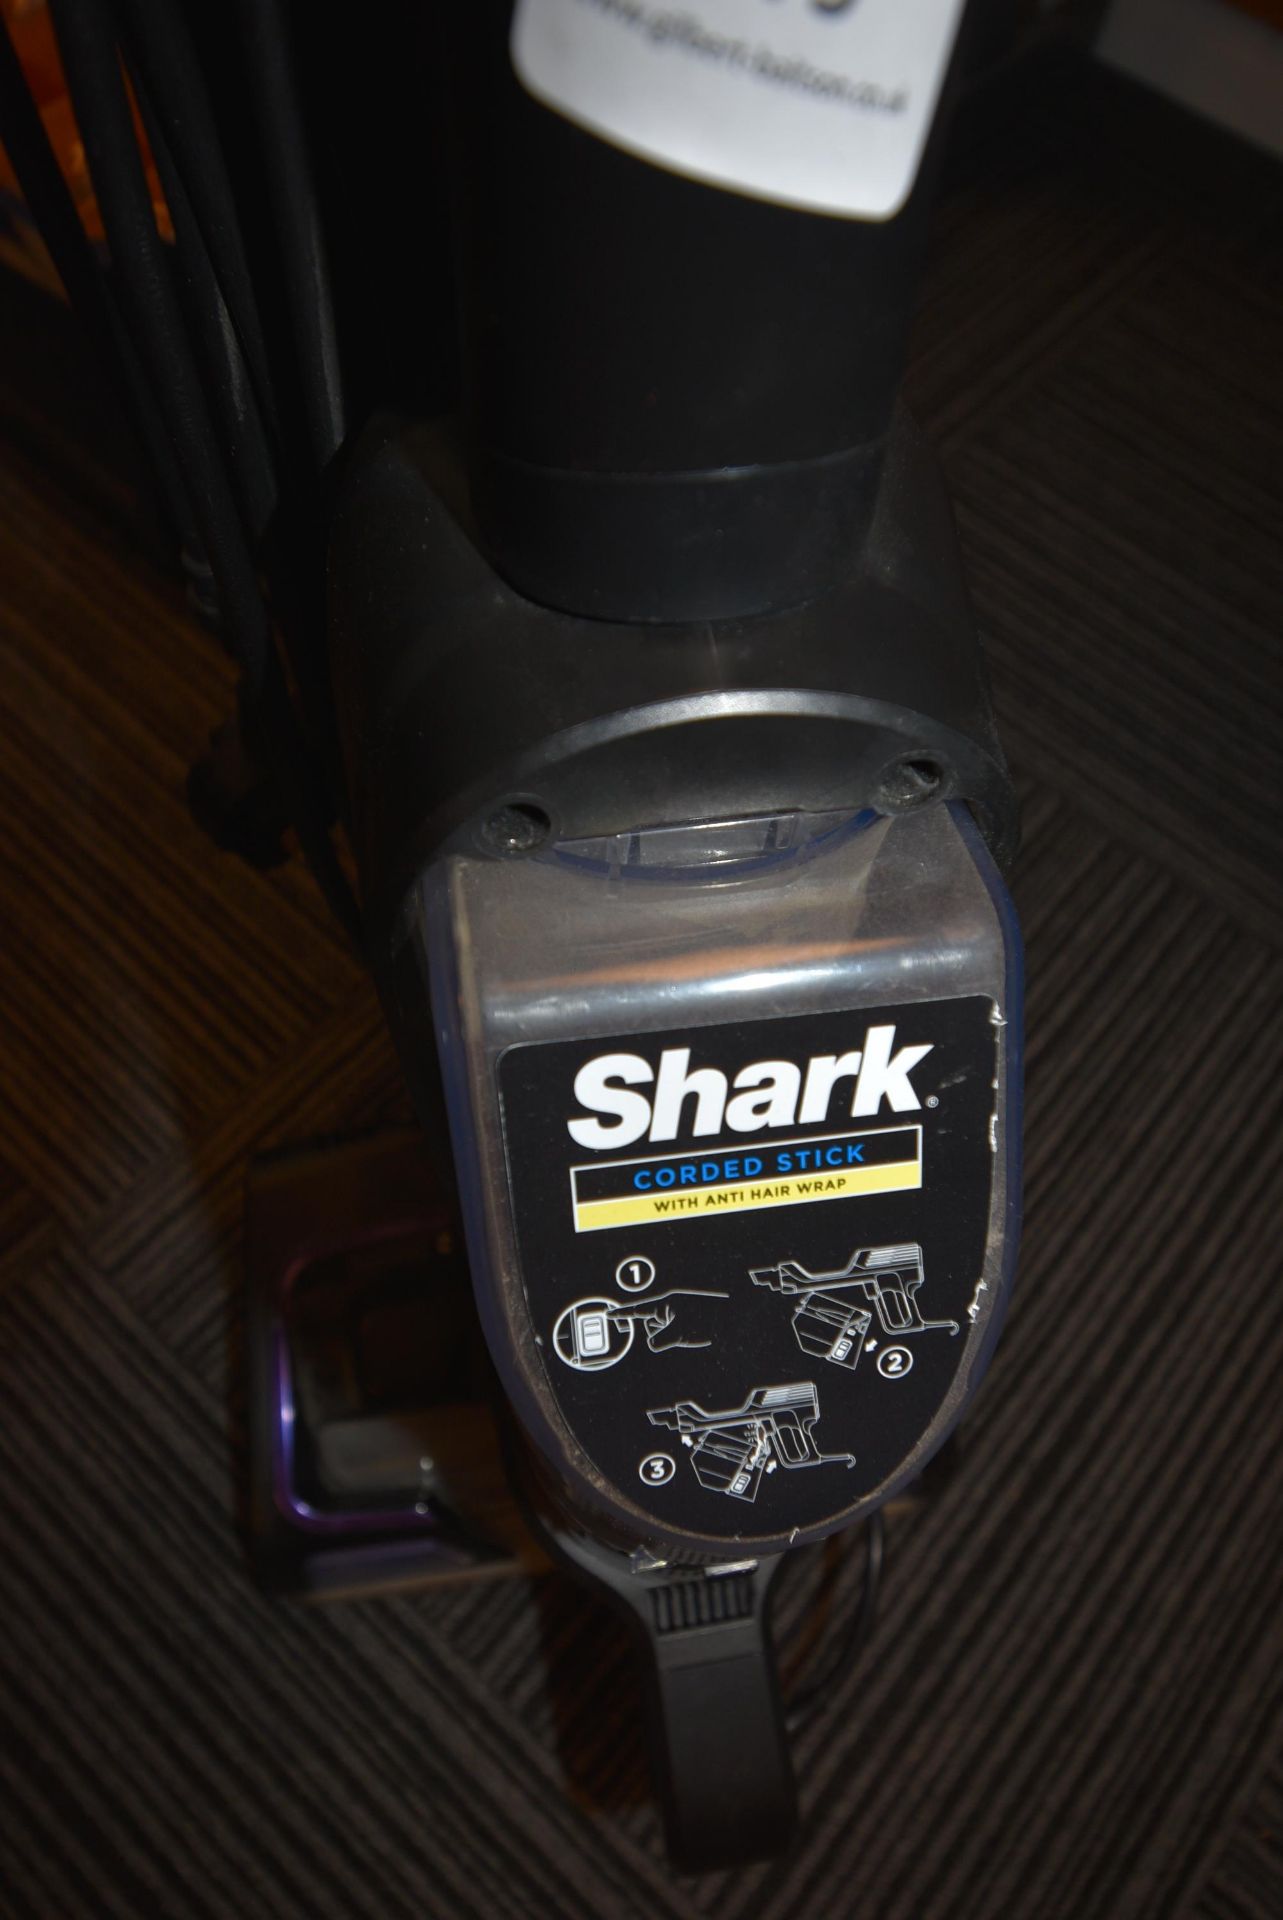 *Shark Upright Corded Vacuum Cleaner - Image 3 of 4